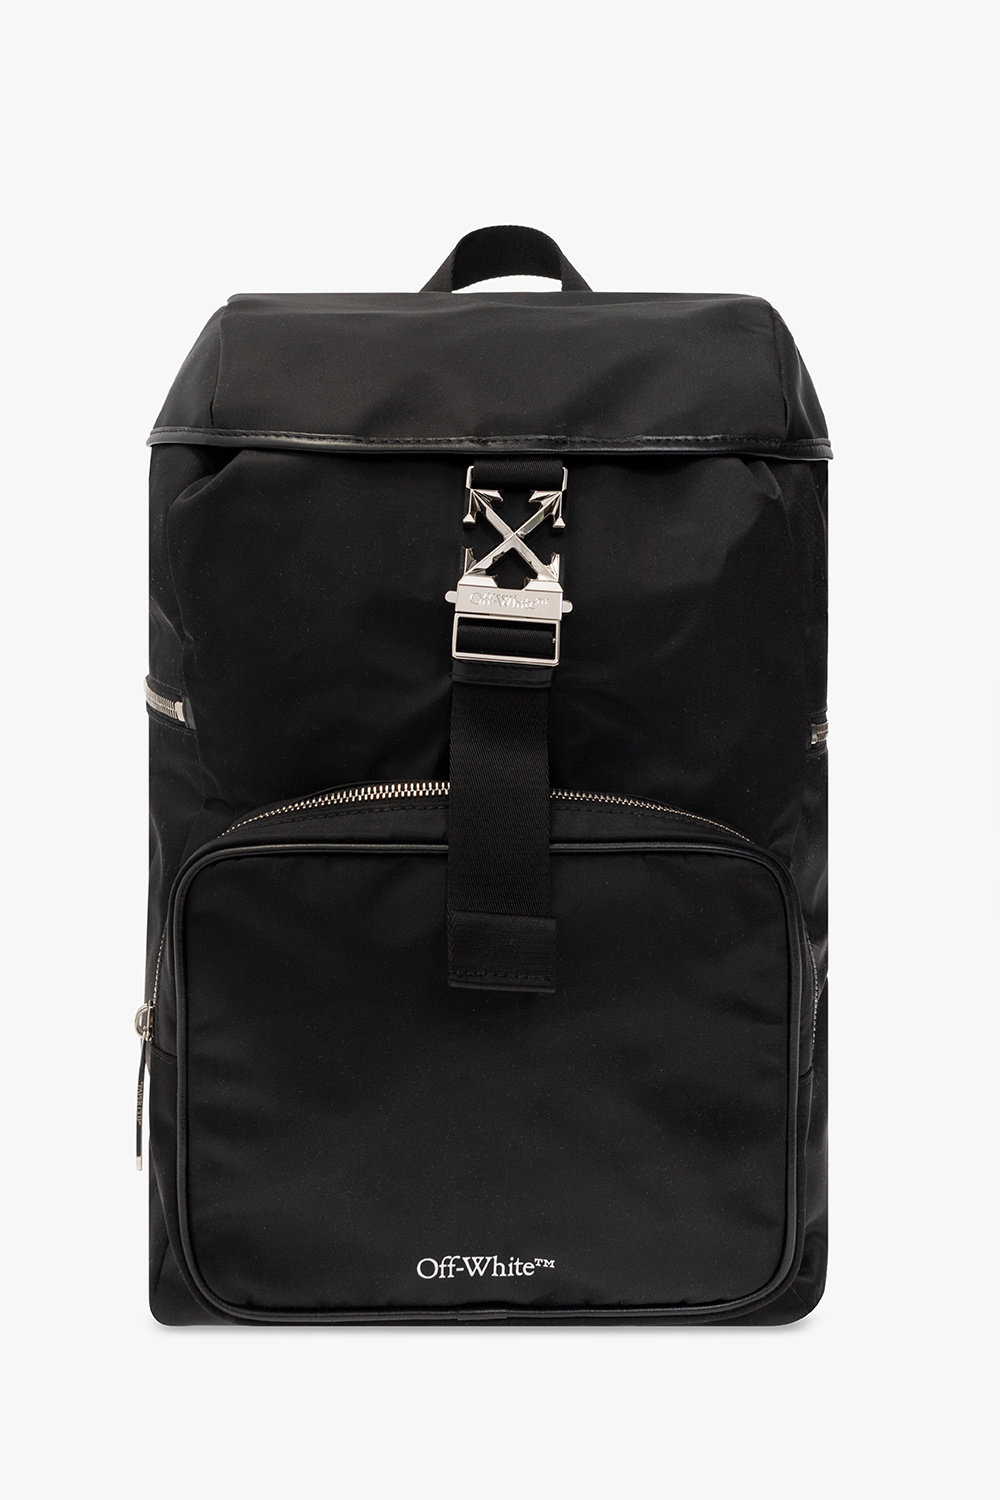 Off-White TRAVEL backpack with logo